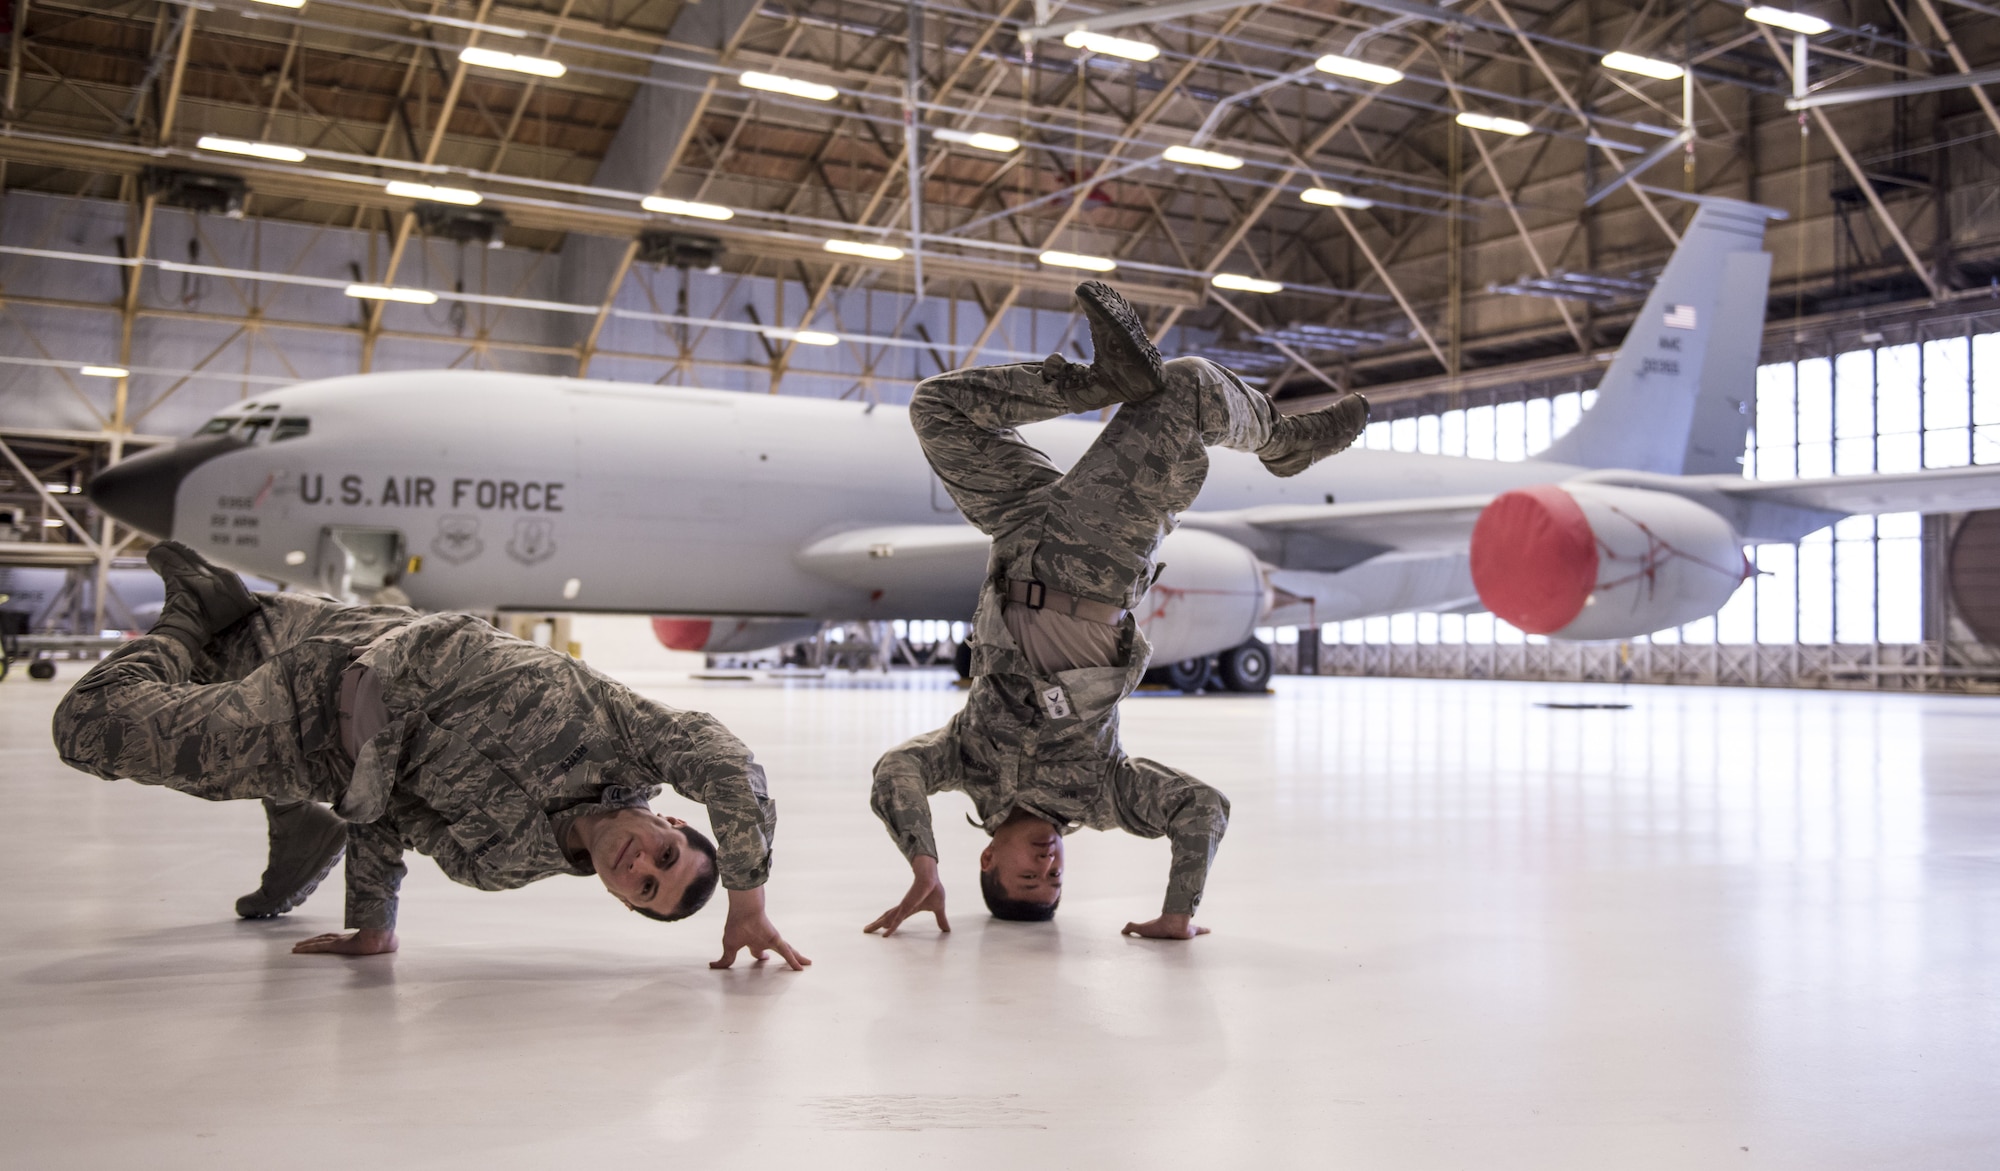 Capt. Juan Reyes, 92nd Air Refueling Wing chaplain, and Senior Airman Simon Vang, 92nd Maintenance Group analyst, break dance in front of a KC-135 Stratotanker, Fairchild Air Force Base, Wash., Jan. 18, 2018. Both Vang and Reyes started dancing in grade school and have fostered a passion for it, which in turn helps them with job performance and becoming more effective Airmen. (U.S. Air Force photo by Senior Airman Sean Campbell)